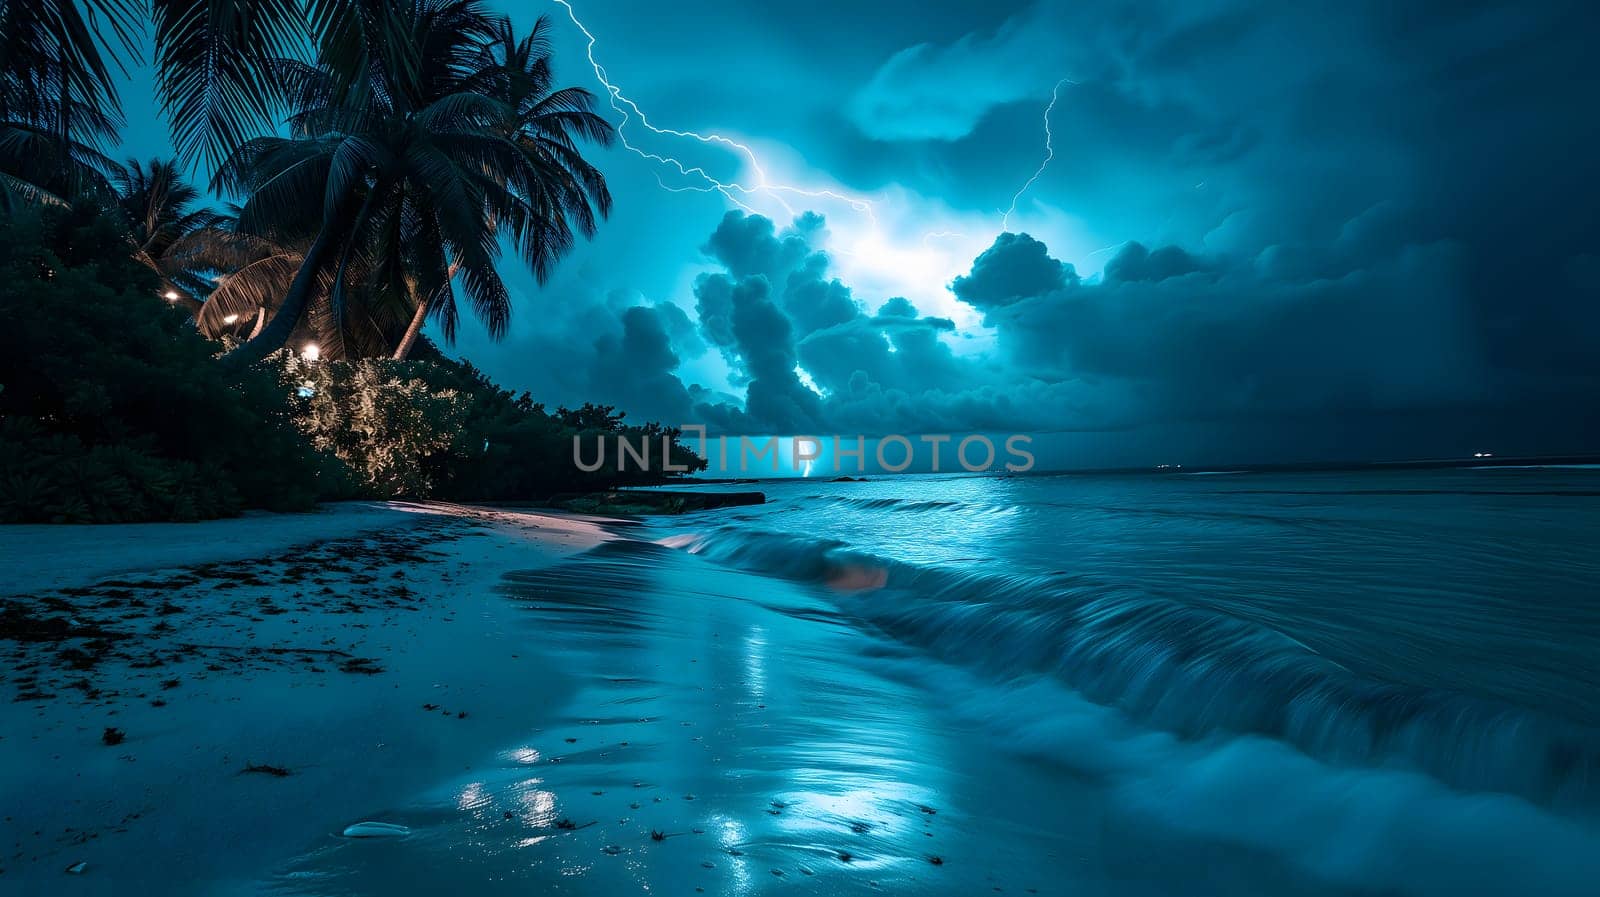 tropical beach view at cloudy stormy night with white sand, turquoise water and palm trees, neural network generated image by z1b